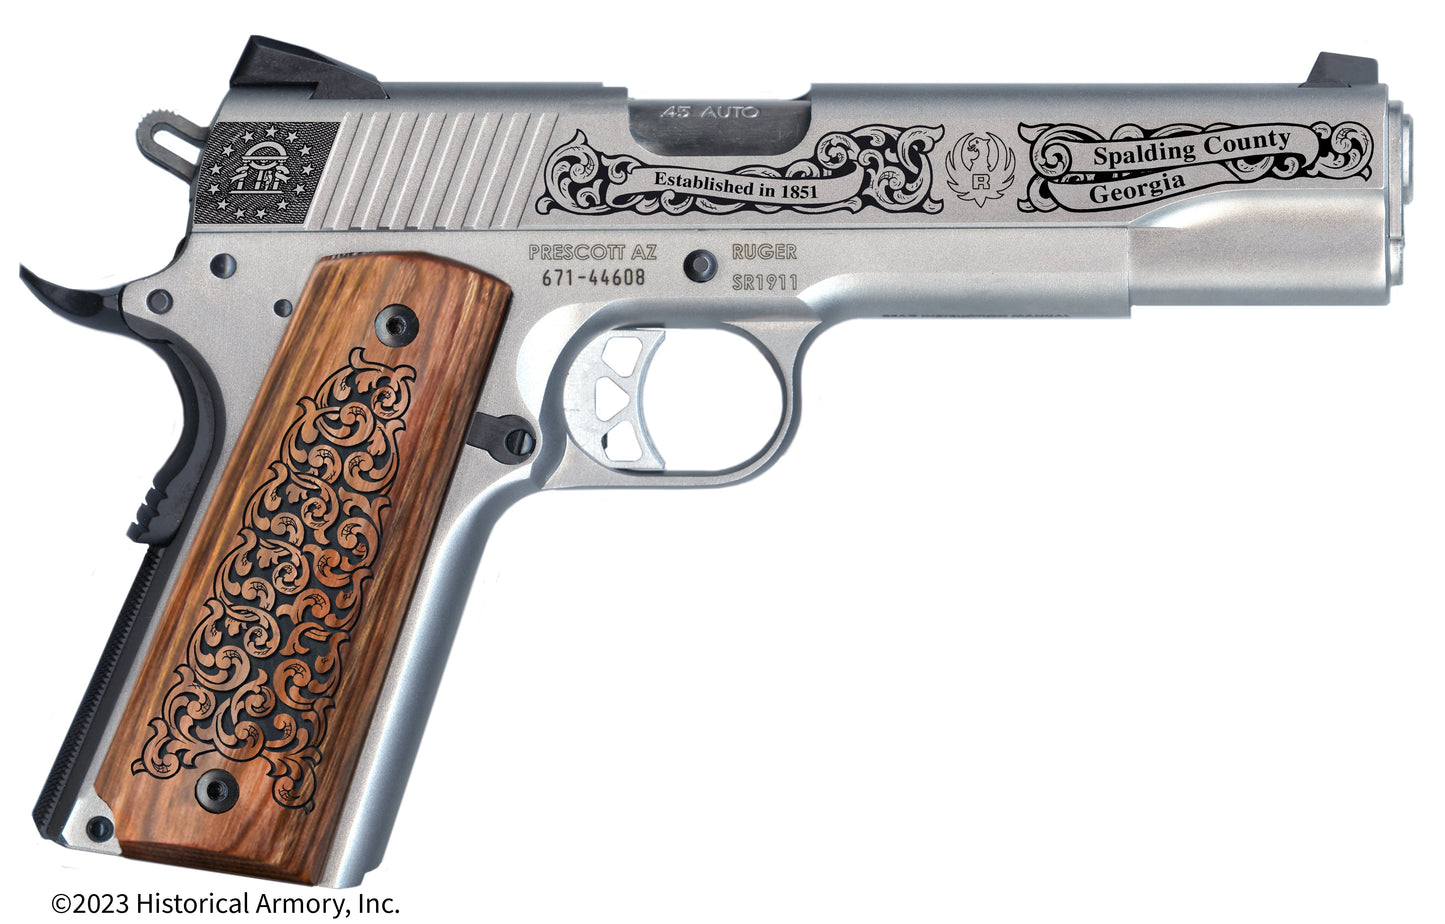 Spalding County Georgia Personalized Engraved .45 Auto Ruger 1911